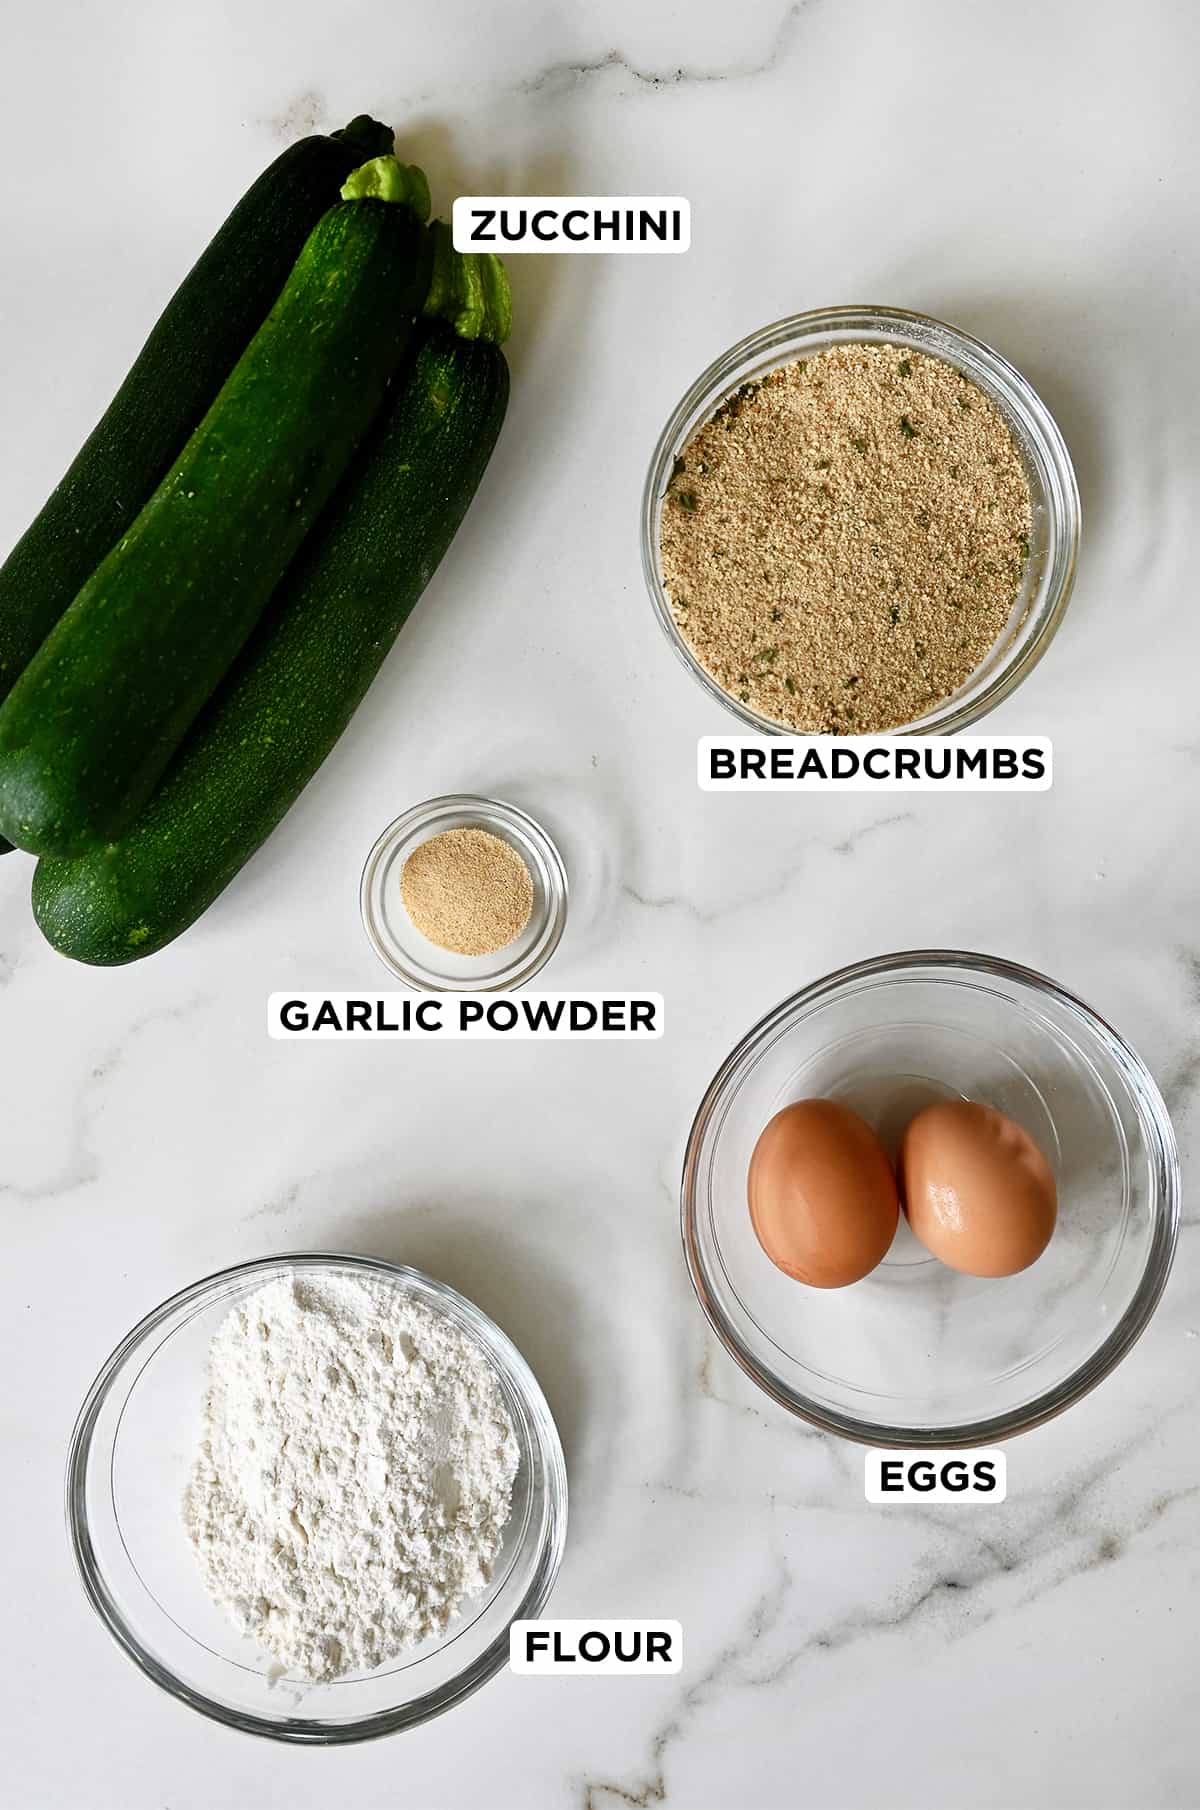 Three zucchini, a small bowl containing breadcrumbs, a bowl with two whole eggs, a bowl with flour and a small bowl containing garlic powder.